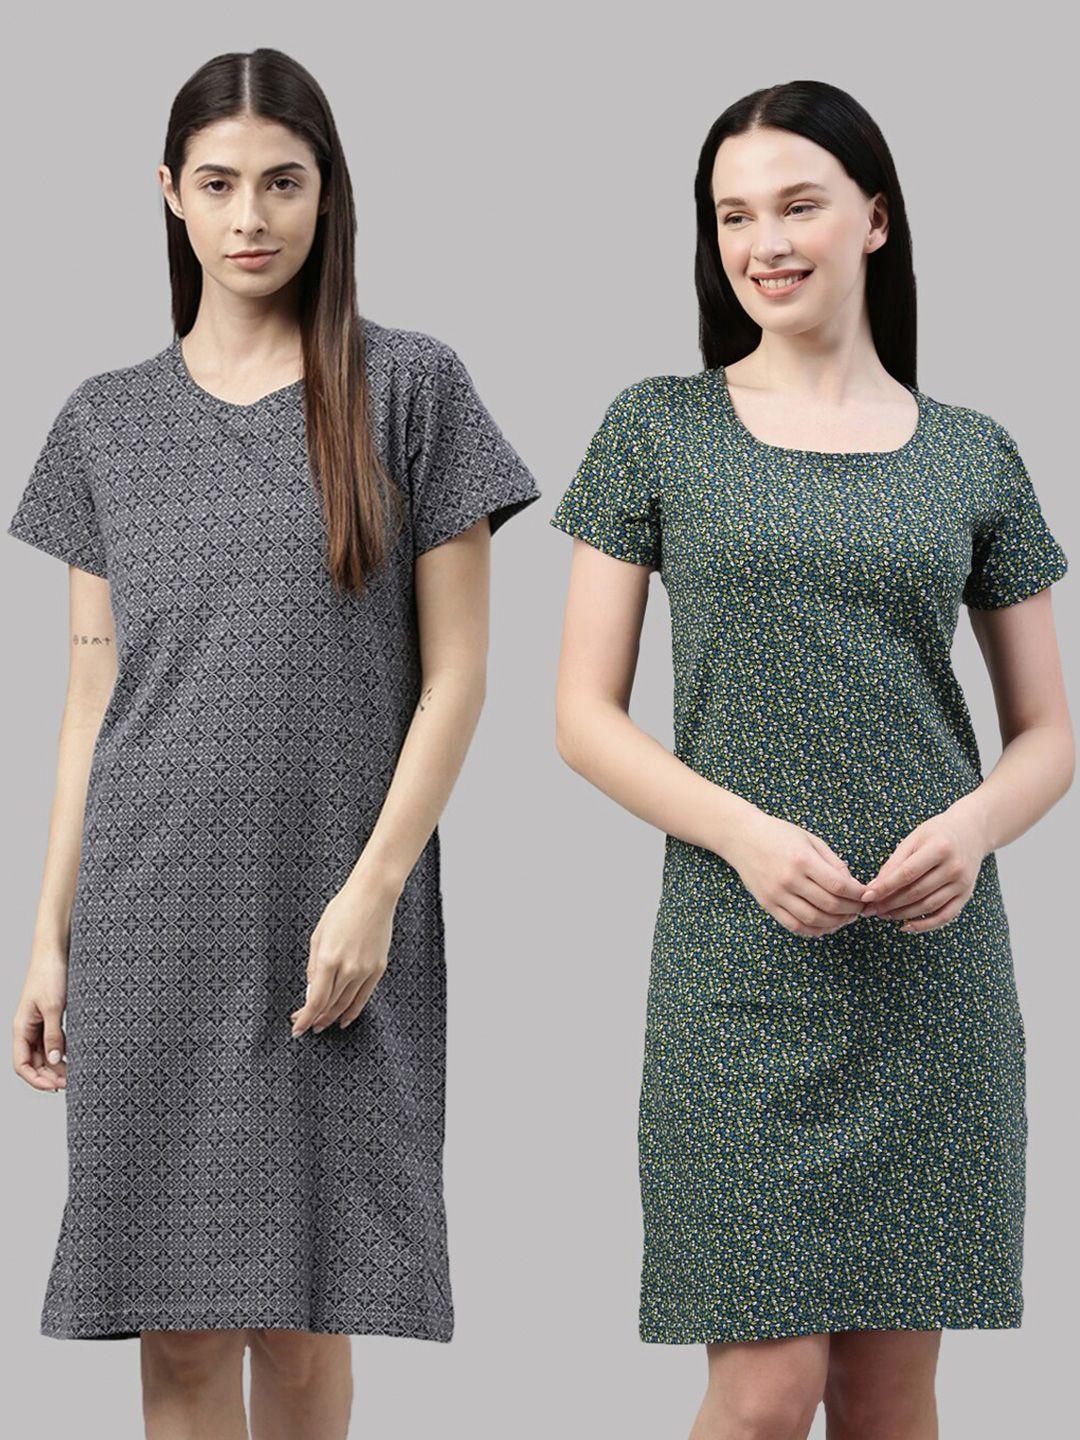 kryptic-pack-of-2-grey-&-green-cotton-printed-nightdress